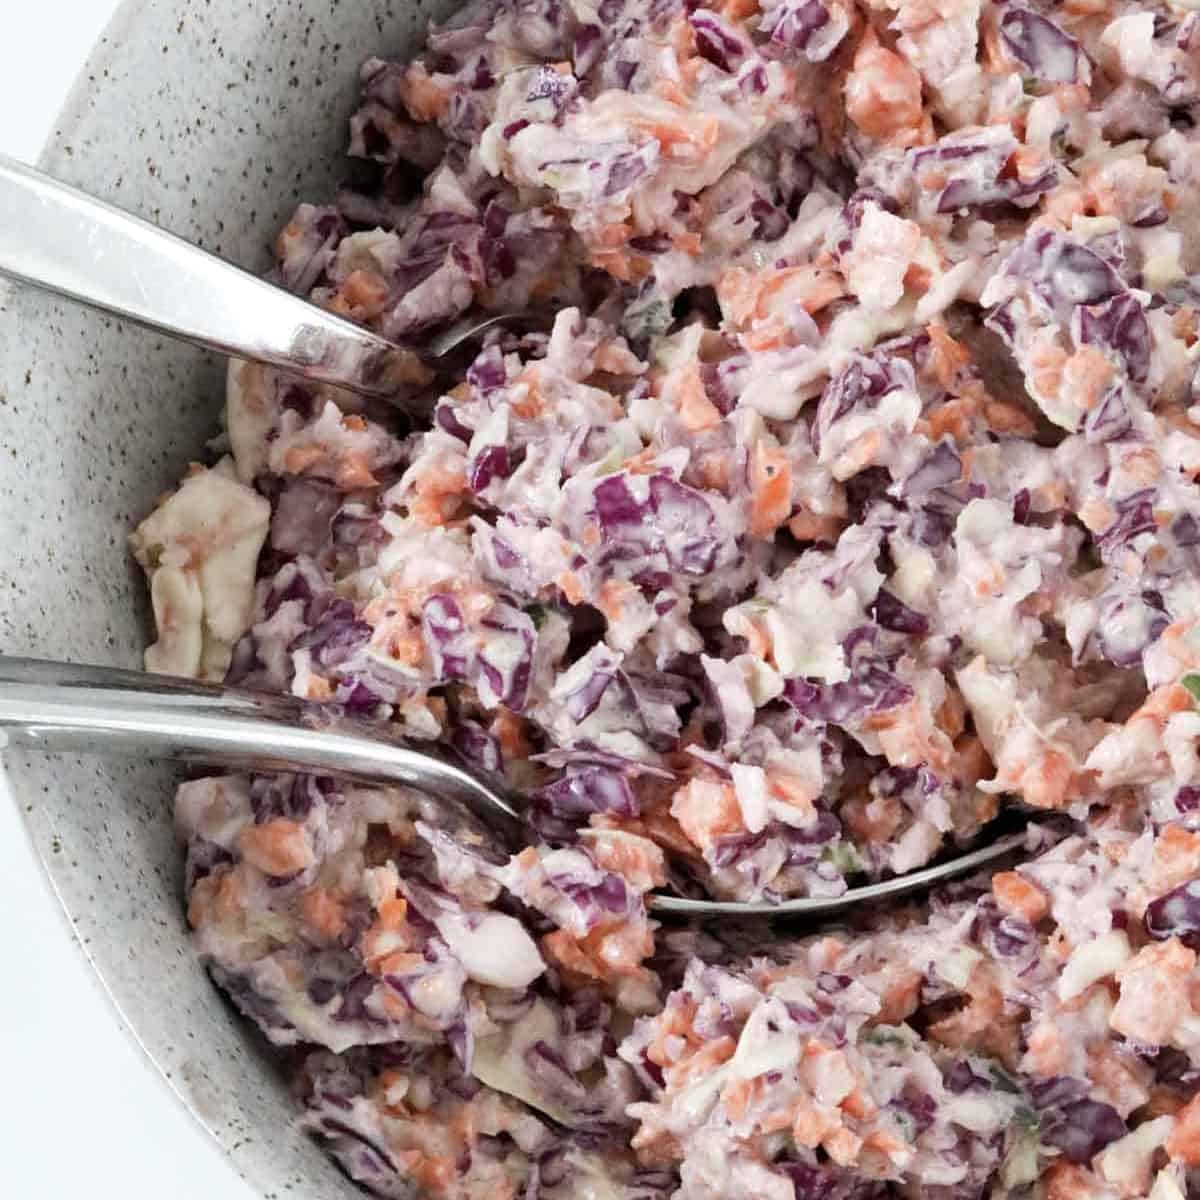 Salad servers in a bowl of creamy cabbage salad.